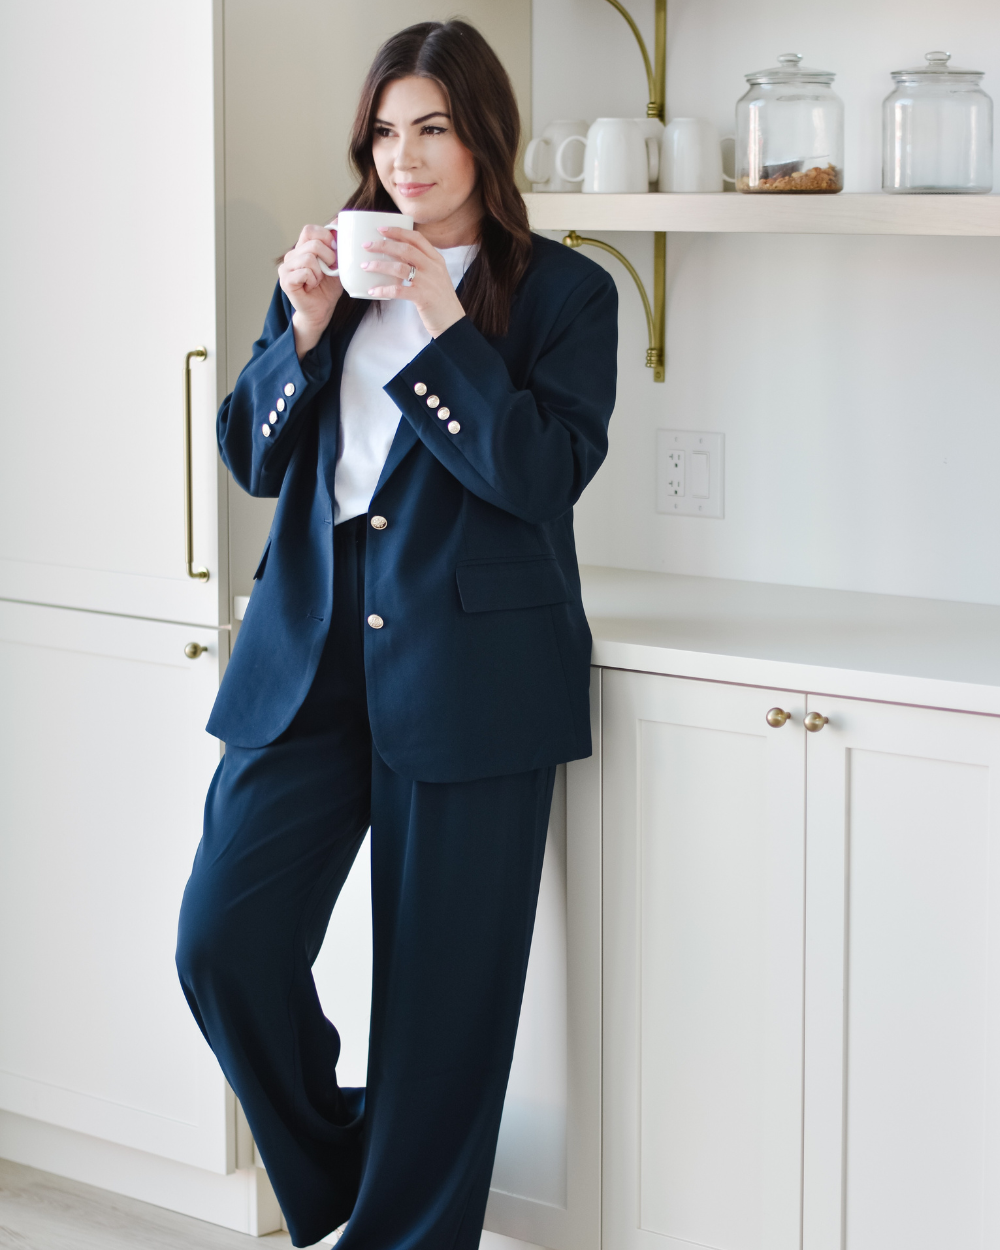 woman wearing a navy suit drinking coffee